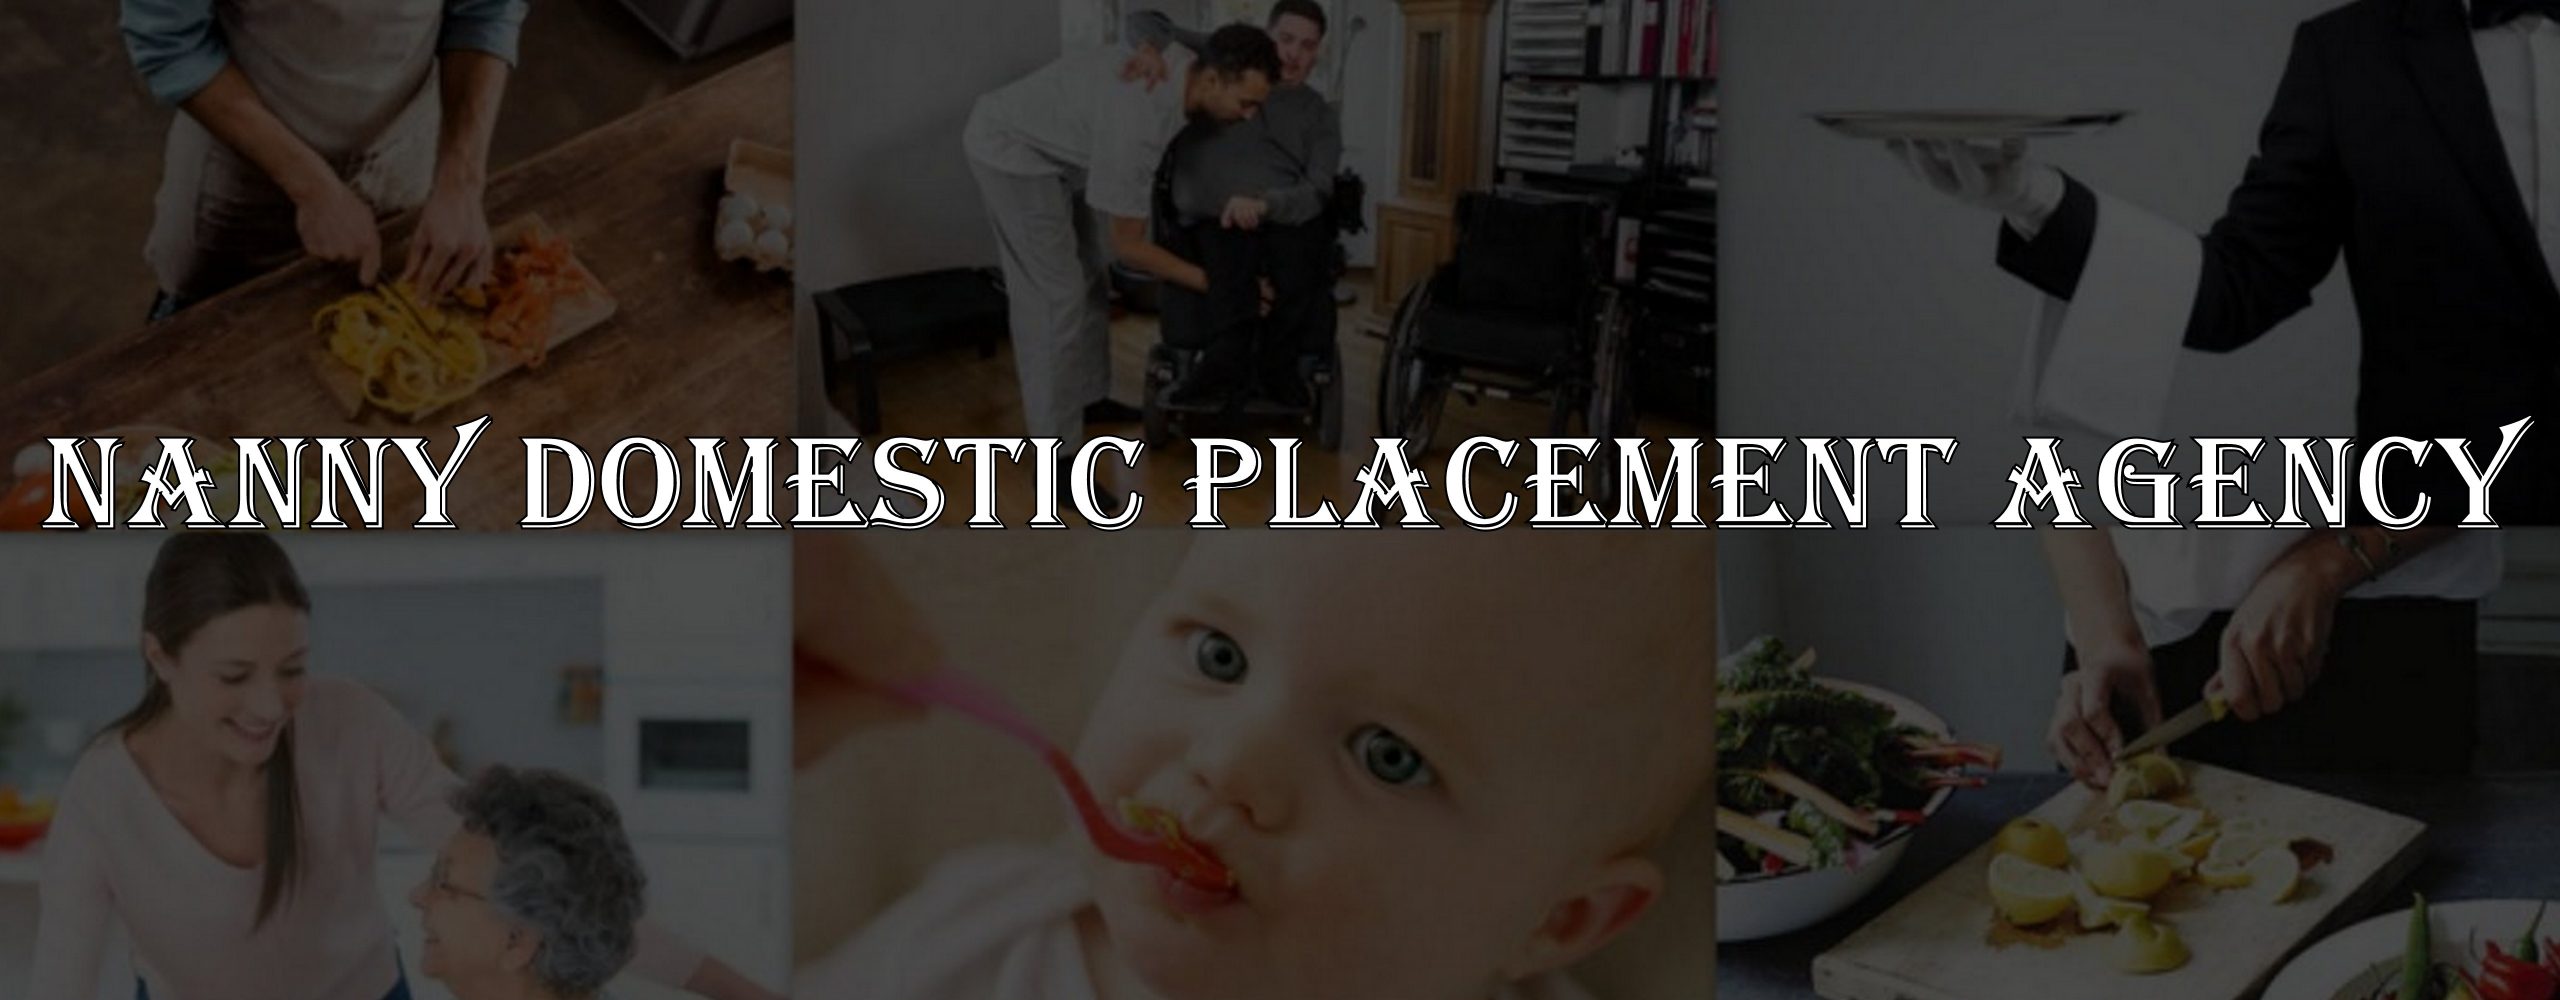 Nanny Domestic Placement Agency